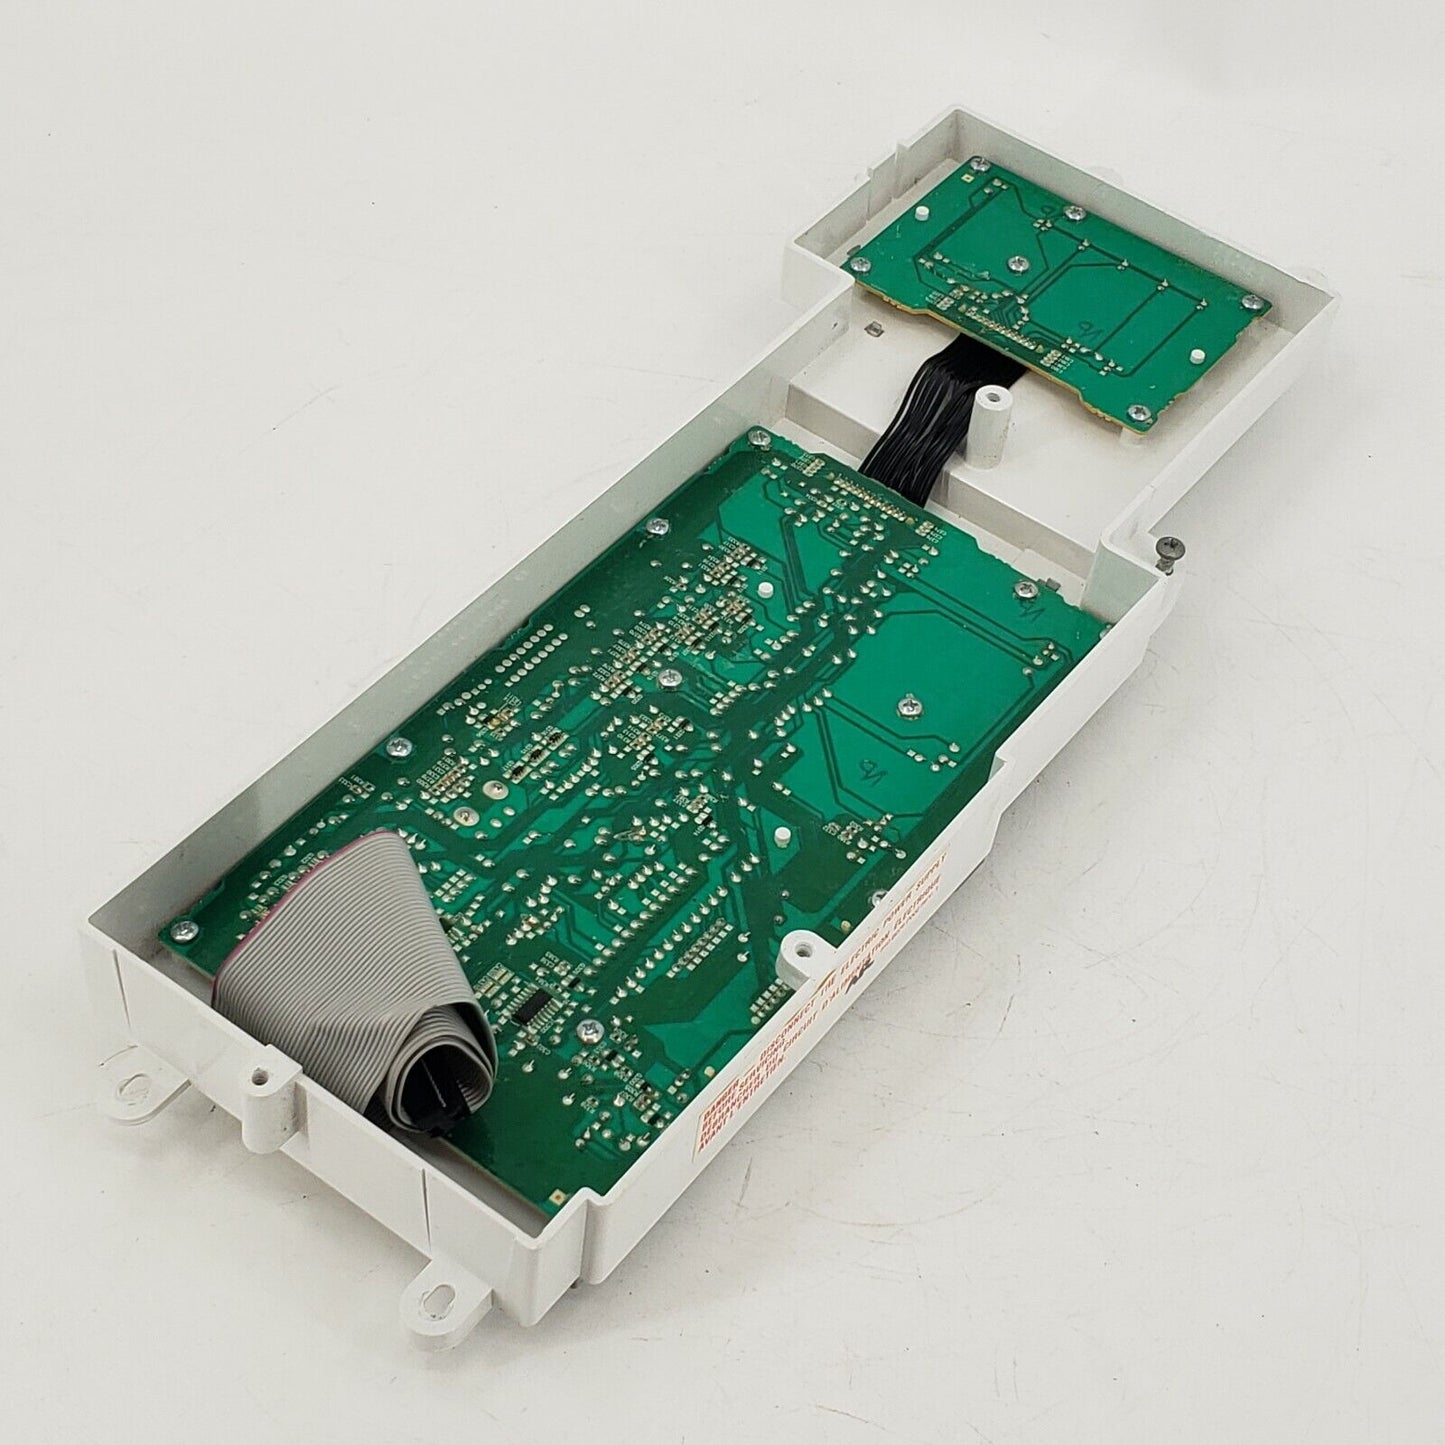 Genuine OEM Replacement for GE Dryer Control Board 540B076P002